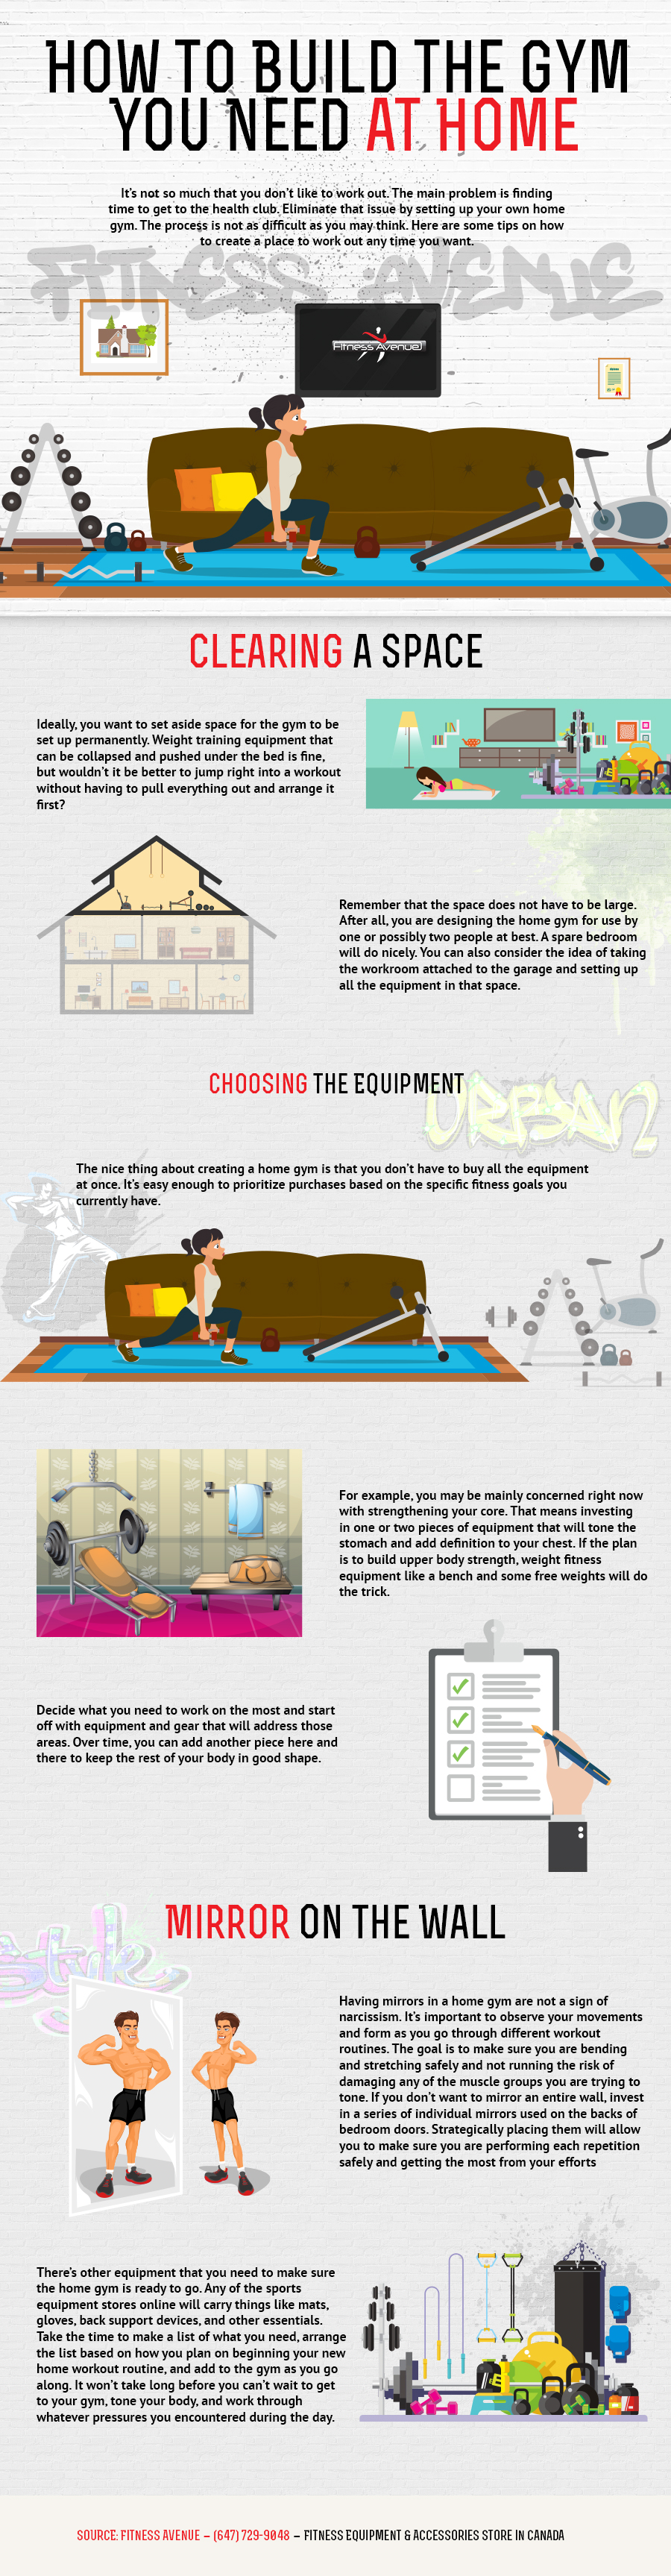 how-to-build-the-gym-at-home